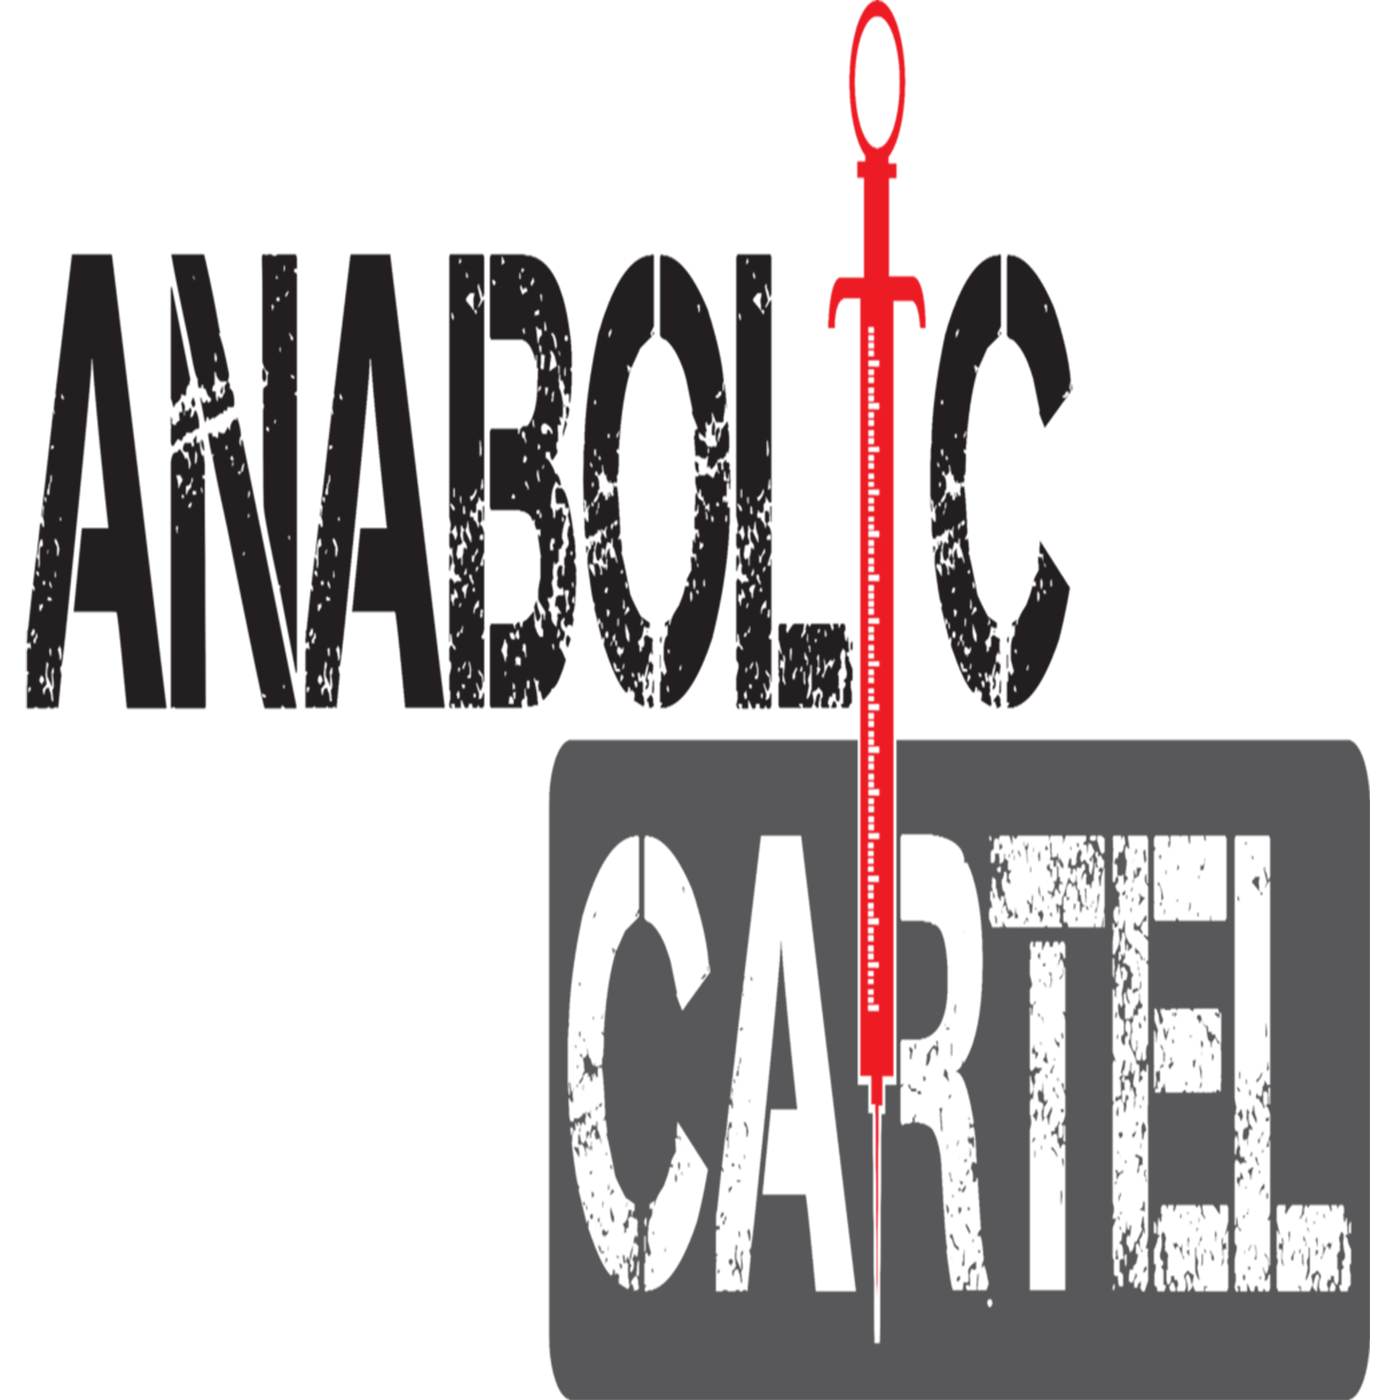 The Anabolic Cartel Podcast